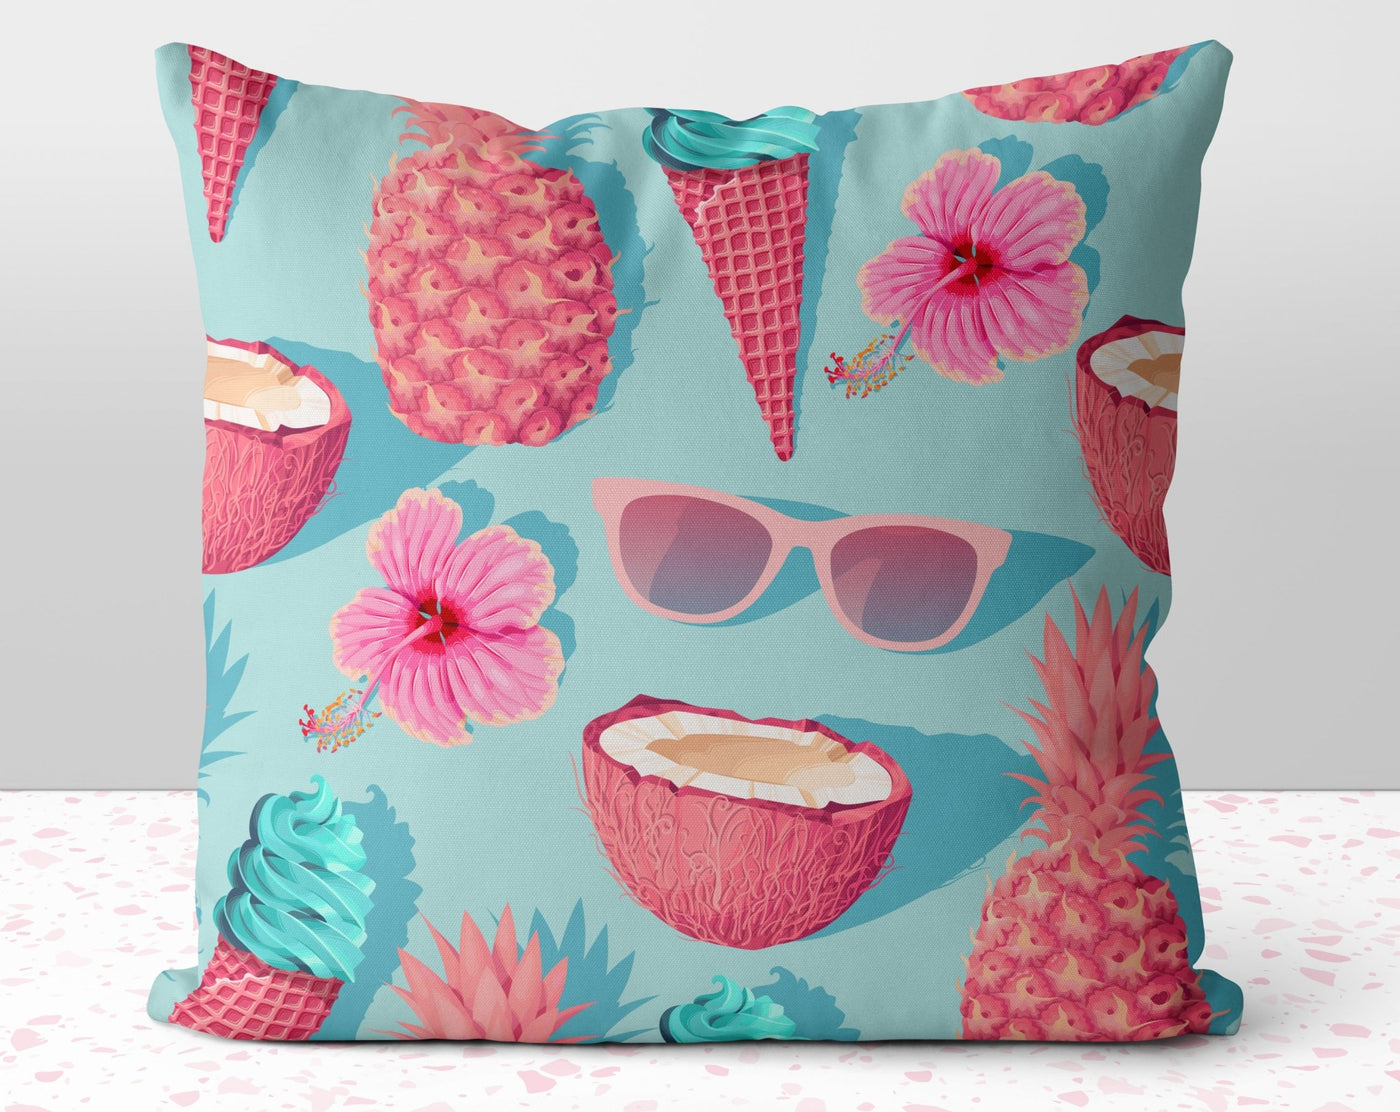 Summer Fun Teal Blue Square Pillow Cover Throw with Pink Coconut Pineapple Sunglasses Accents - Cush Potato Pillows